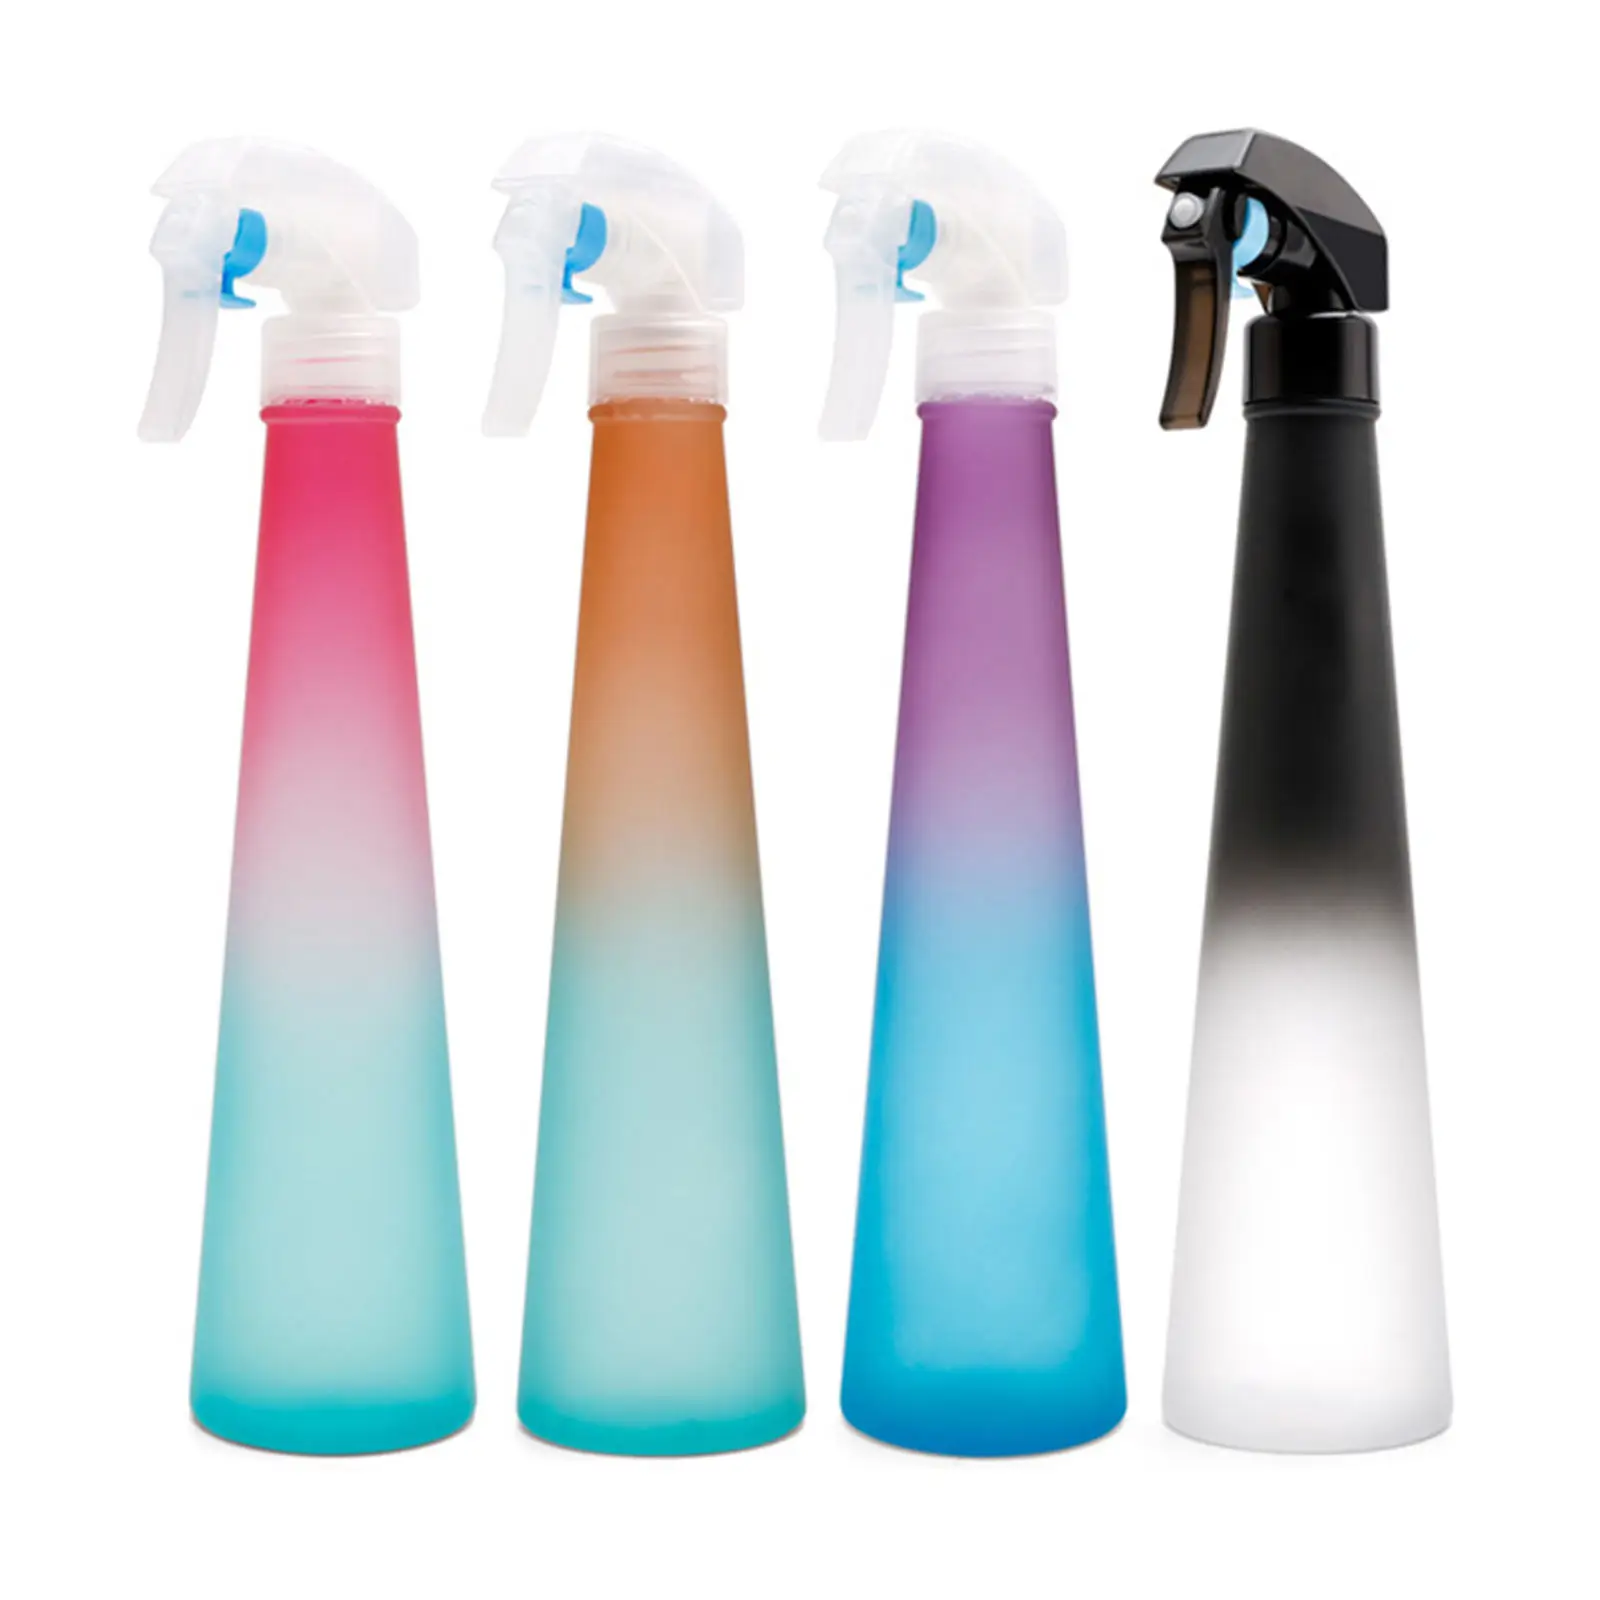 Stylish Hairdressing Spray Bottle Refillable Beauty for Salon Hair Care Curling Gardening Pets Girls Boy Travel Hotel Office